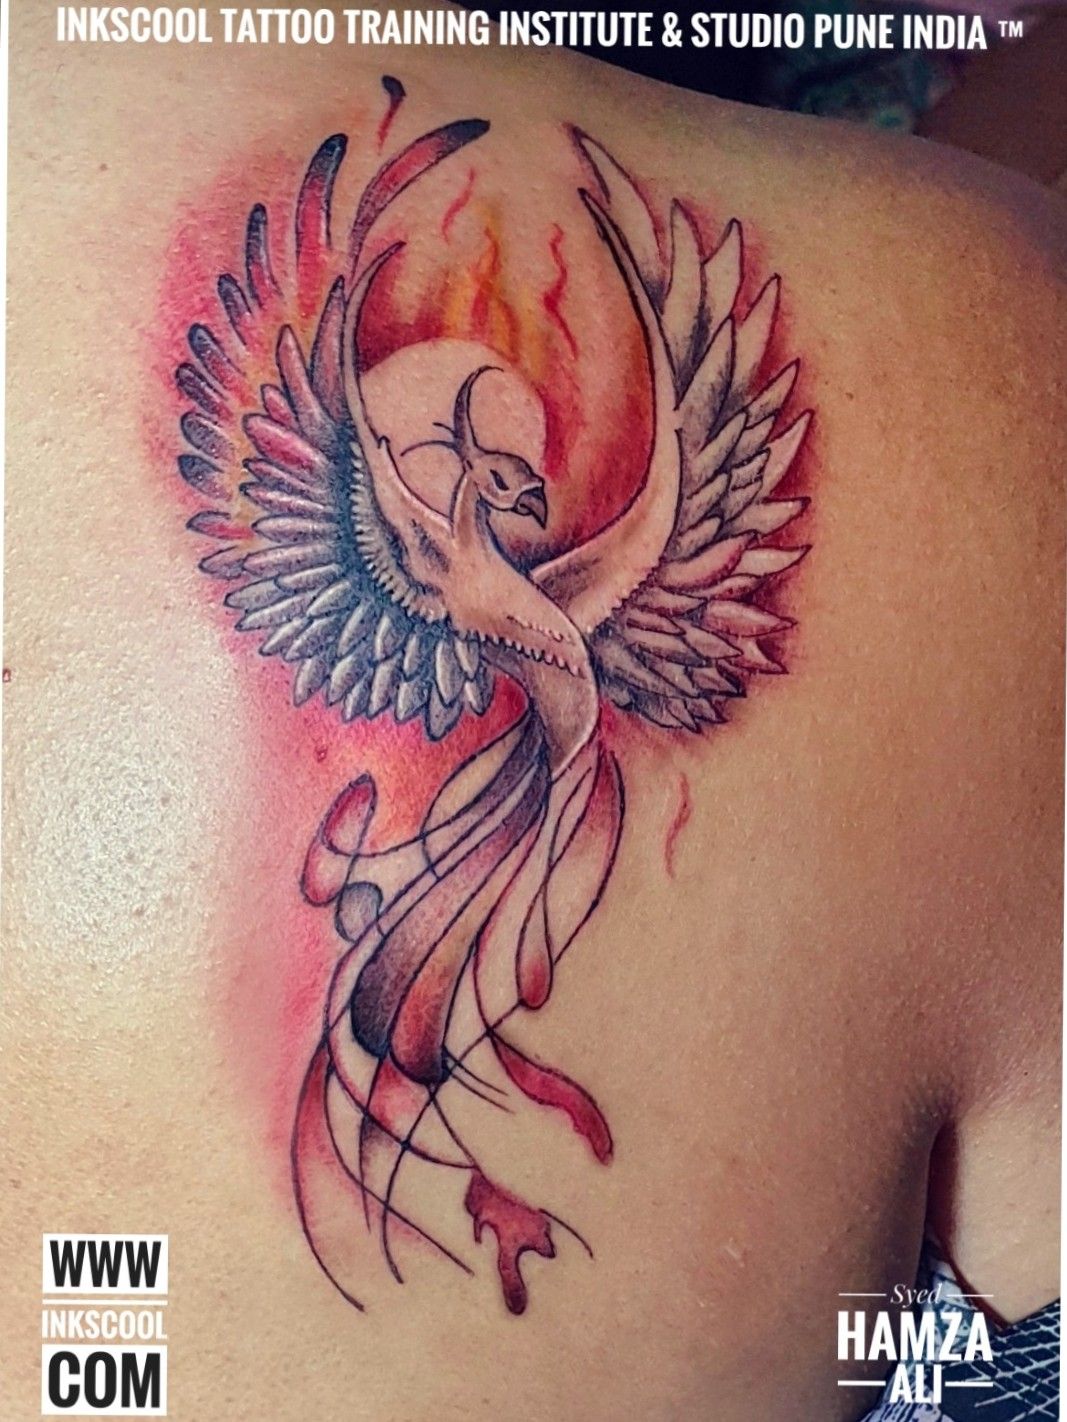 Style Inks Tattoos  Piercing Training Institute in FalaknumaHyderabad   Best Permanent Tattoo Artists in Hyderabad  Justdial